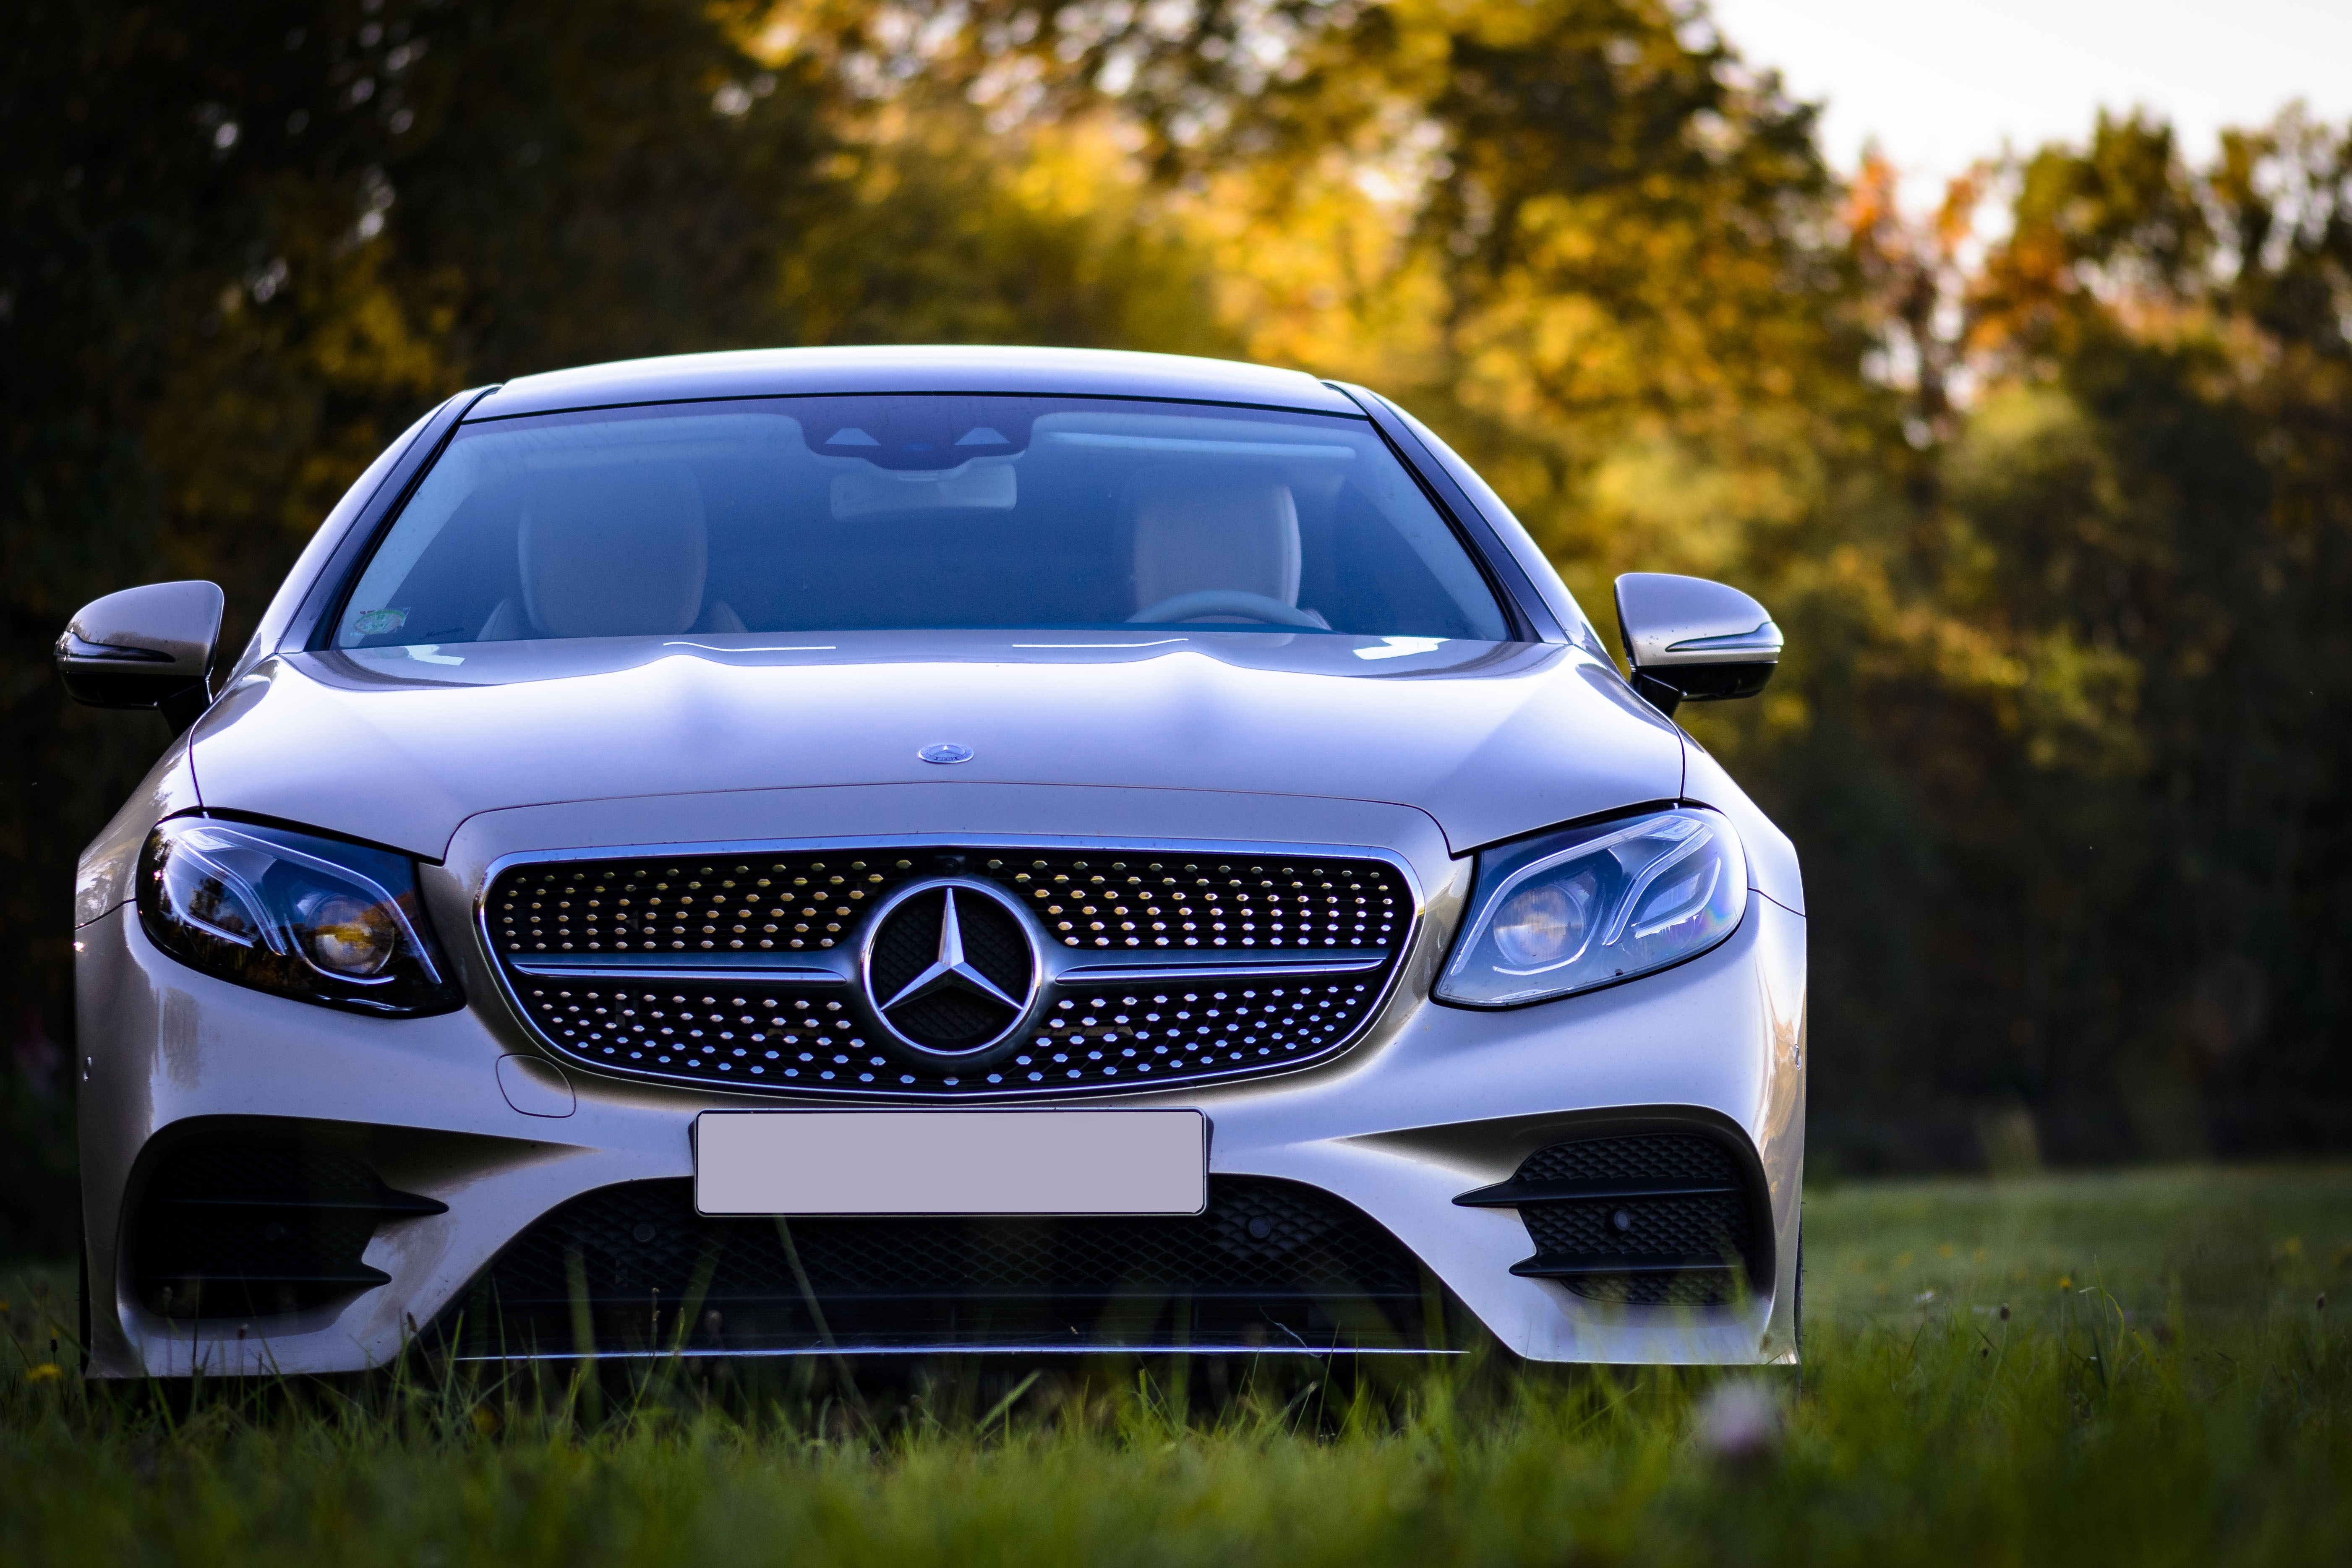 Wallpaper Full HD car, cars, front view, mercedes benz, mercedes, modern, up to date, silver, silvery